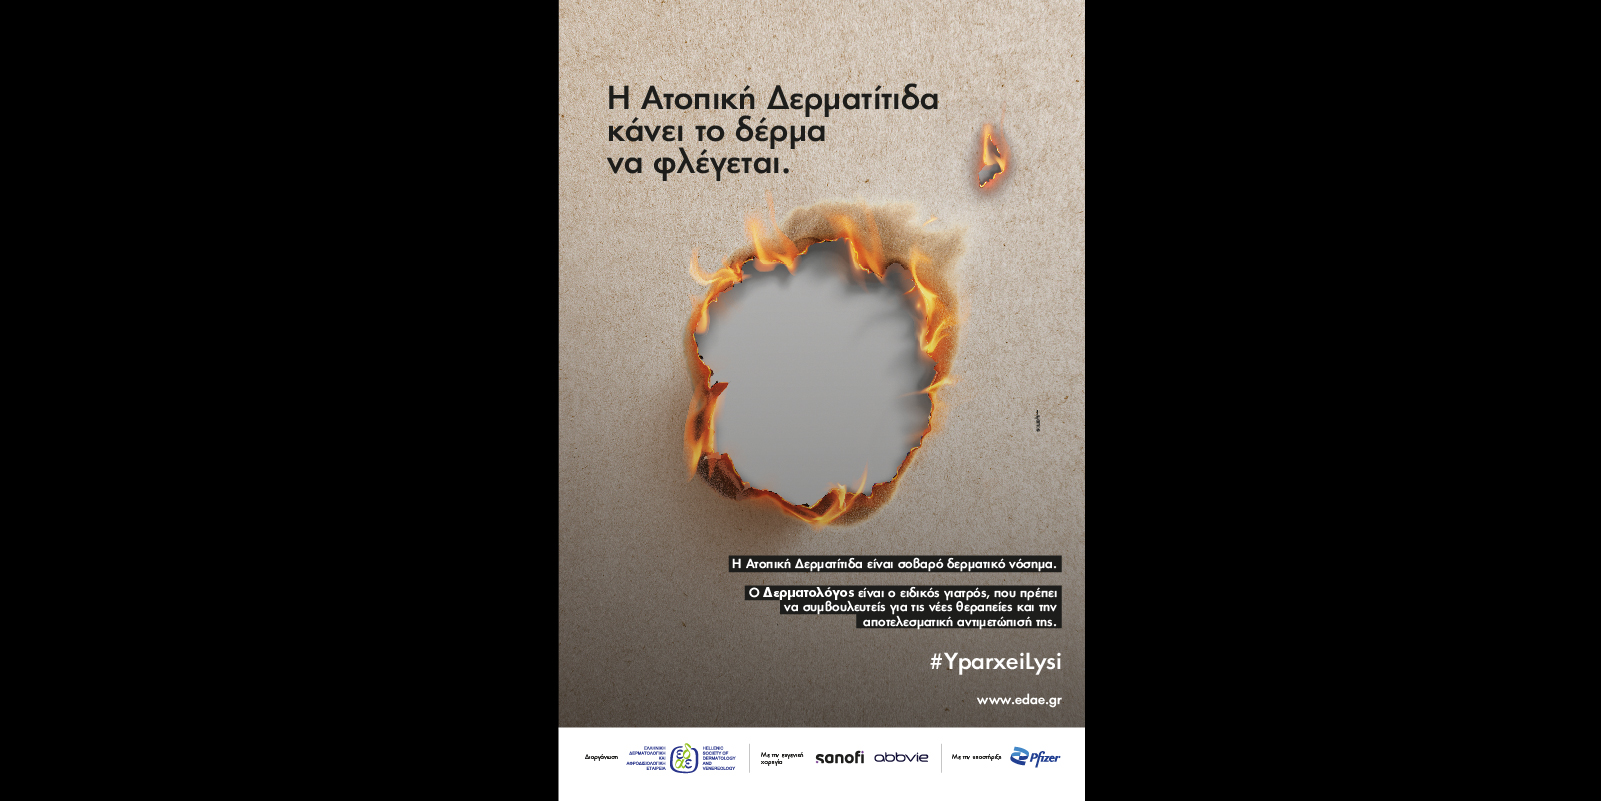 HELLENIC SOCIETY OF DERMATOLOGY AND VENEREOLOGY – ATOPIC DERMATITIS CAMPAIGN